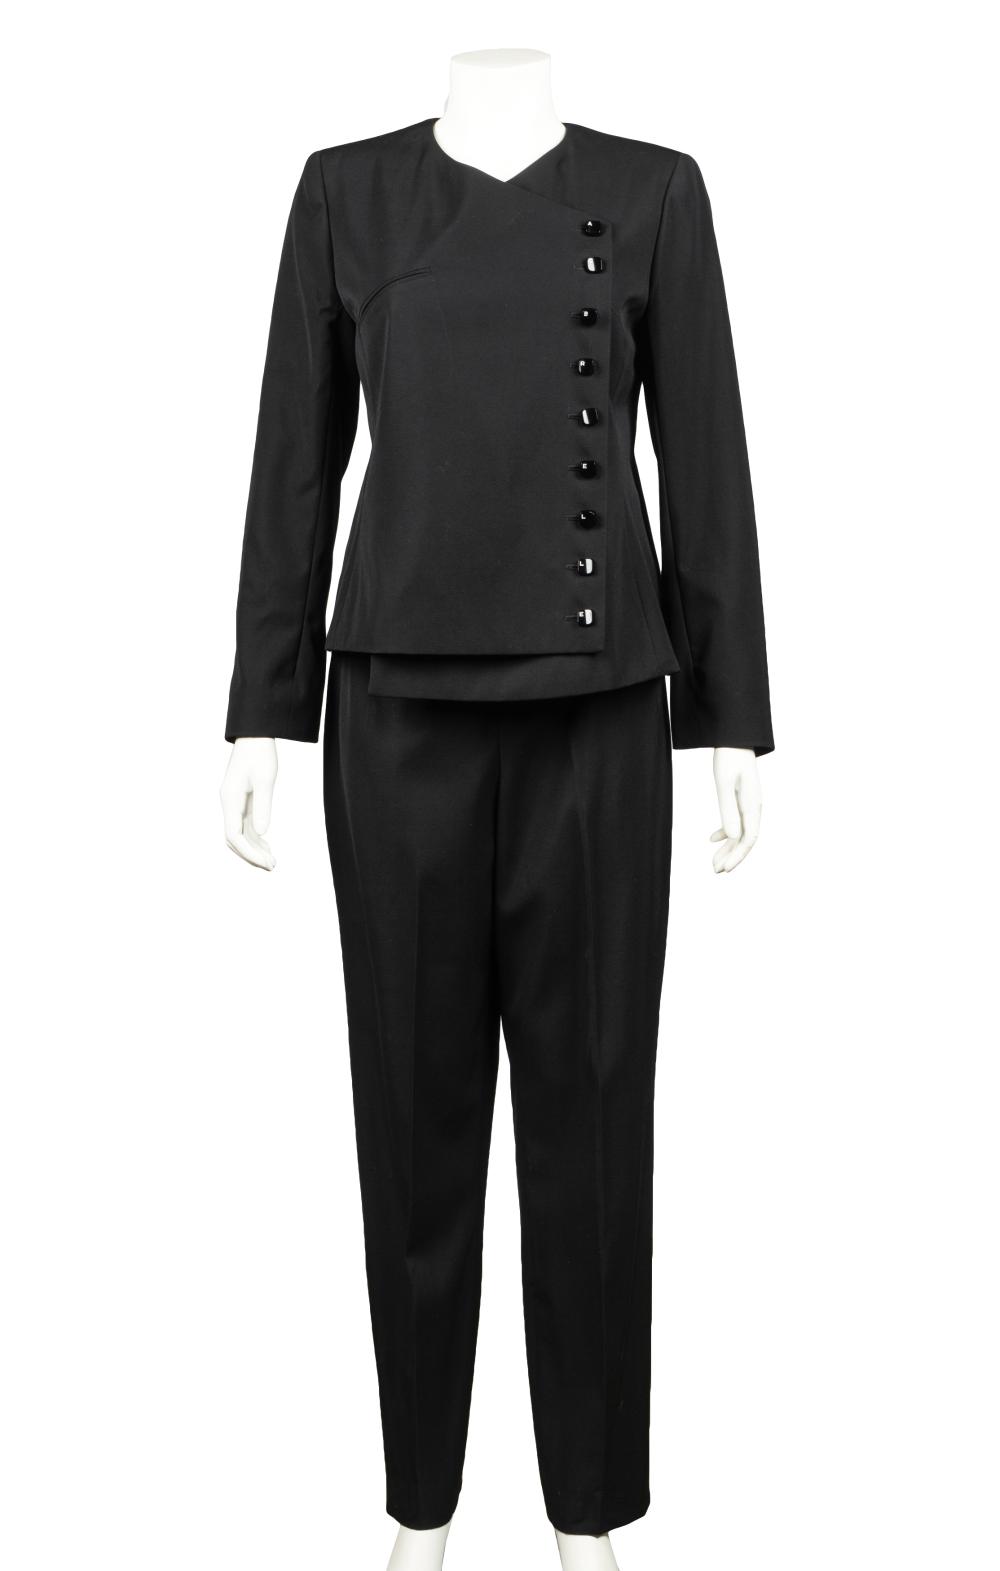 CHANEL BLACK PANTSUITwool; the